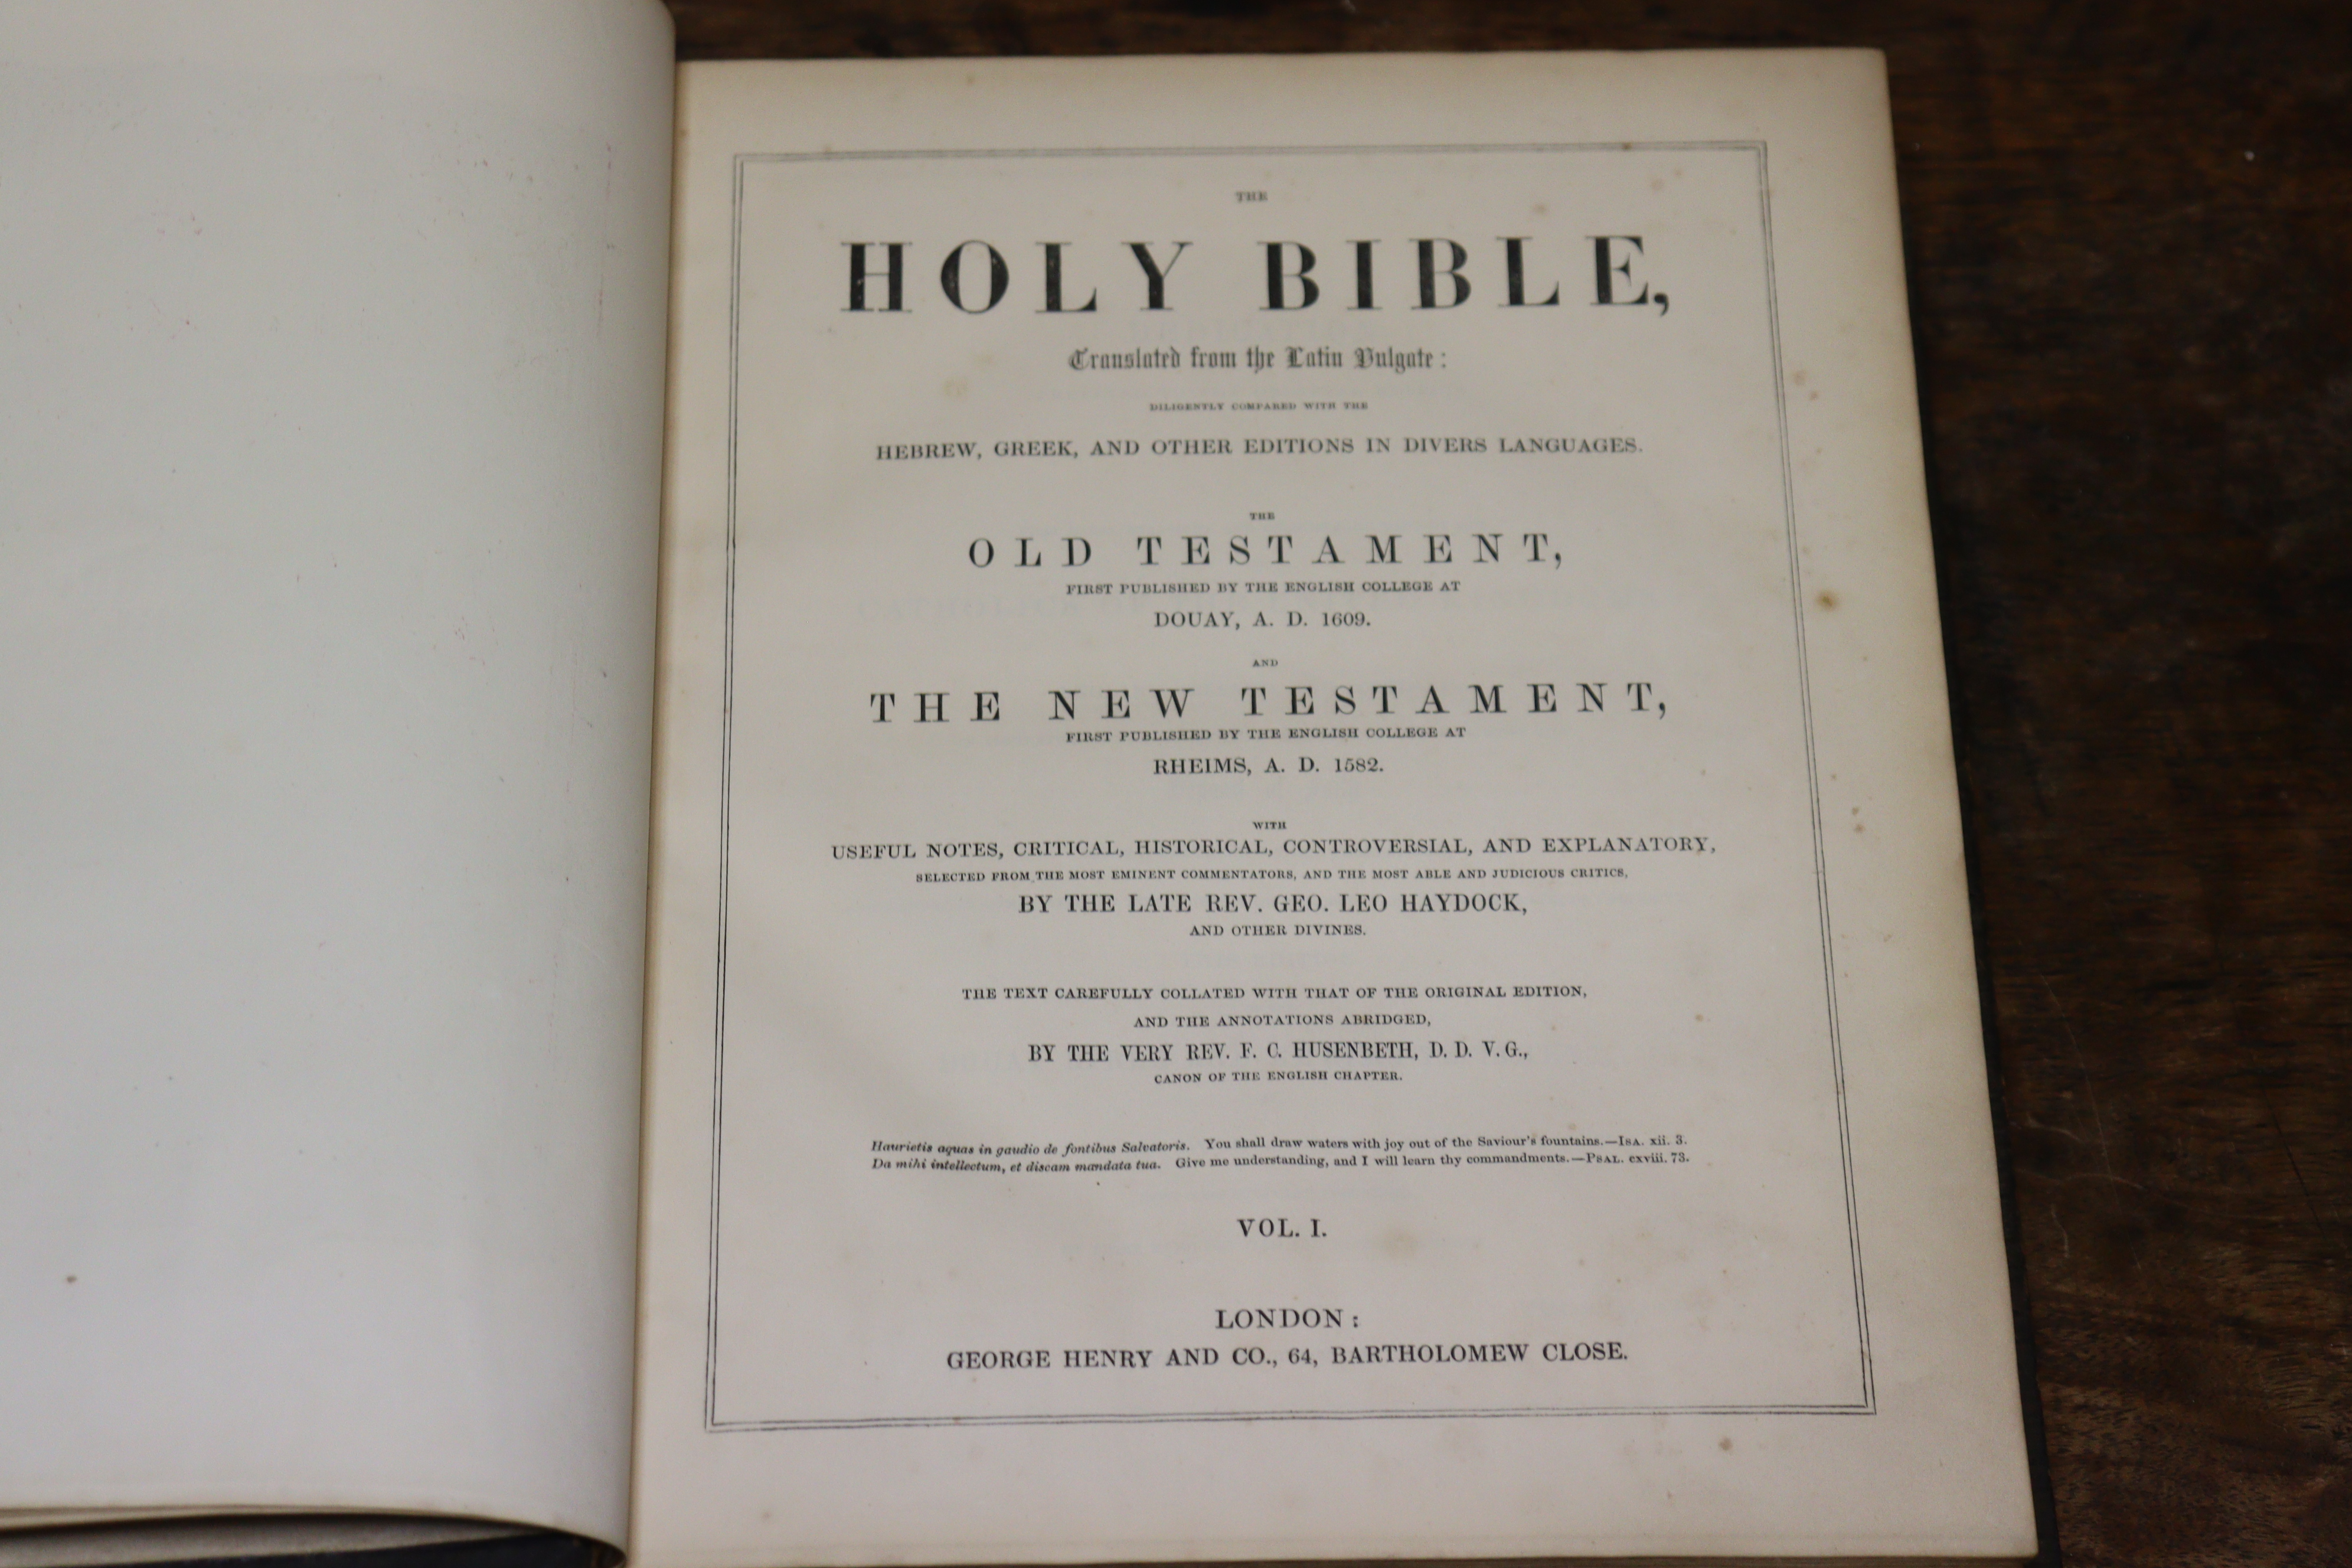 Two mid-19th century volumes “The Holy Bible, translated from the Latin Dulgate” by the late Rev - Image 5 of 8